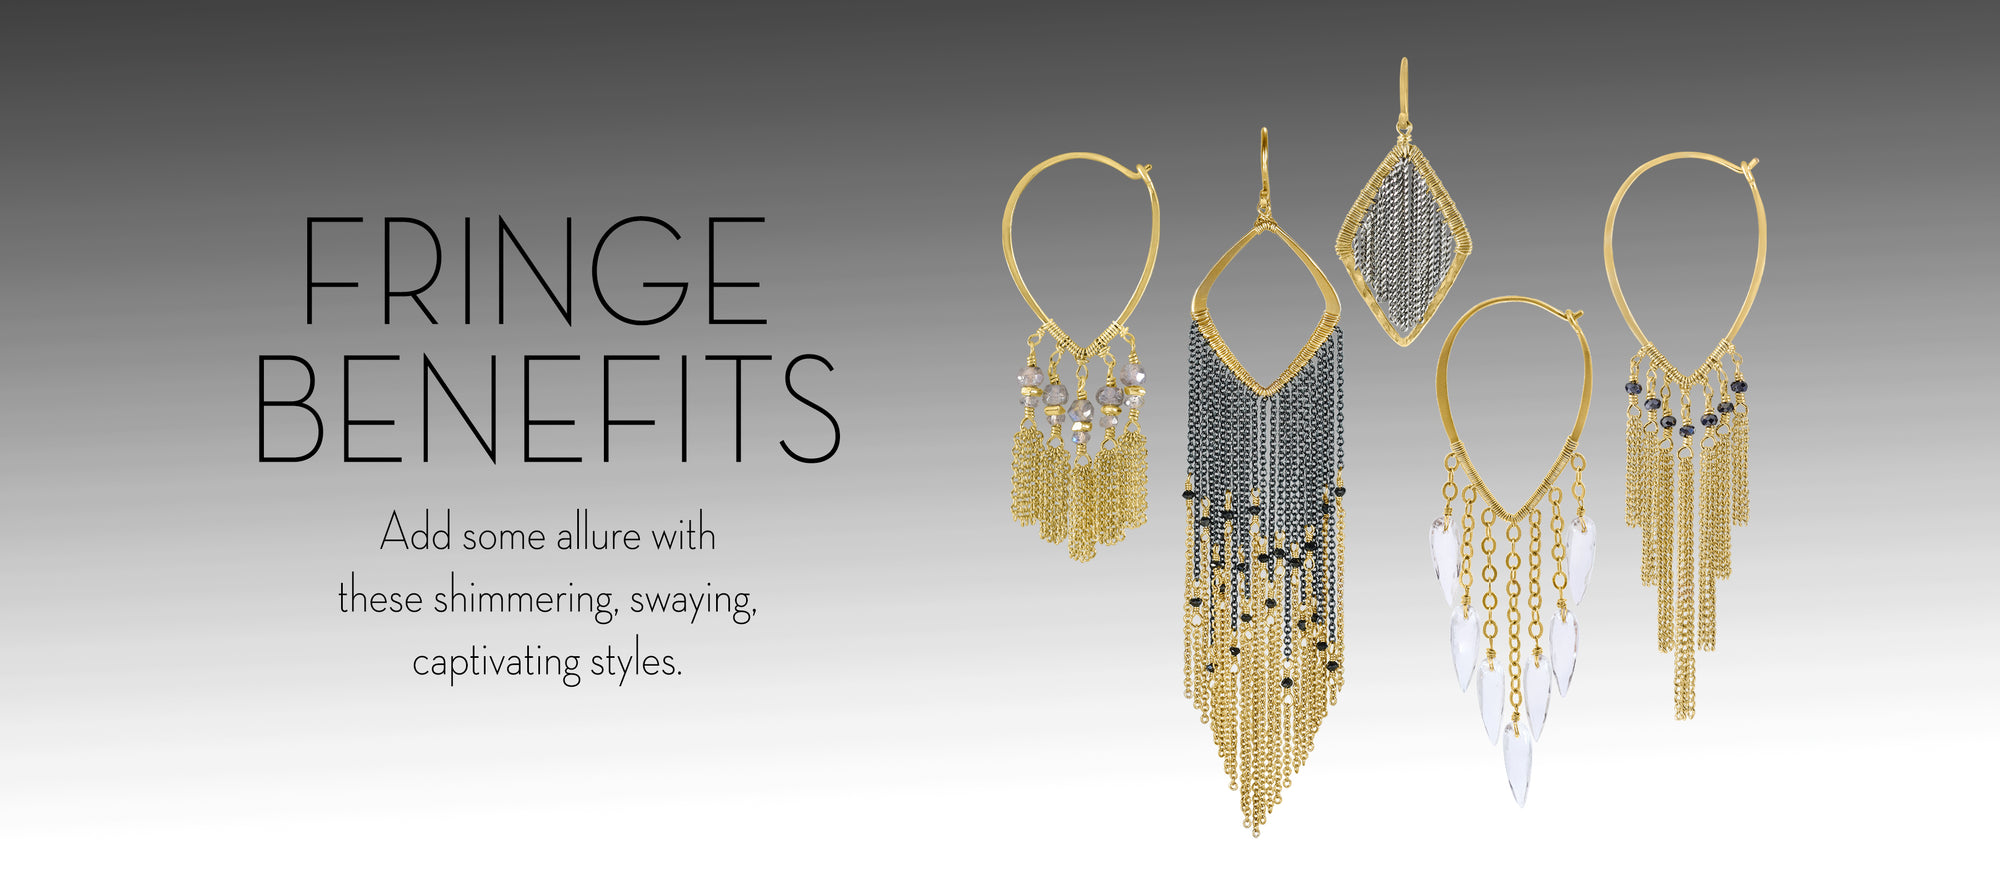 Fringe Benefits. Add some allure with these shimmering swaying captivating styles